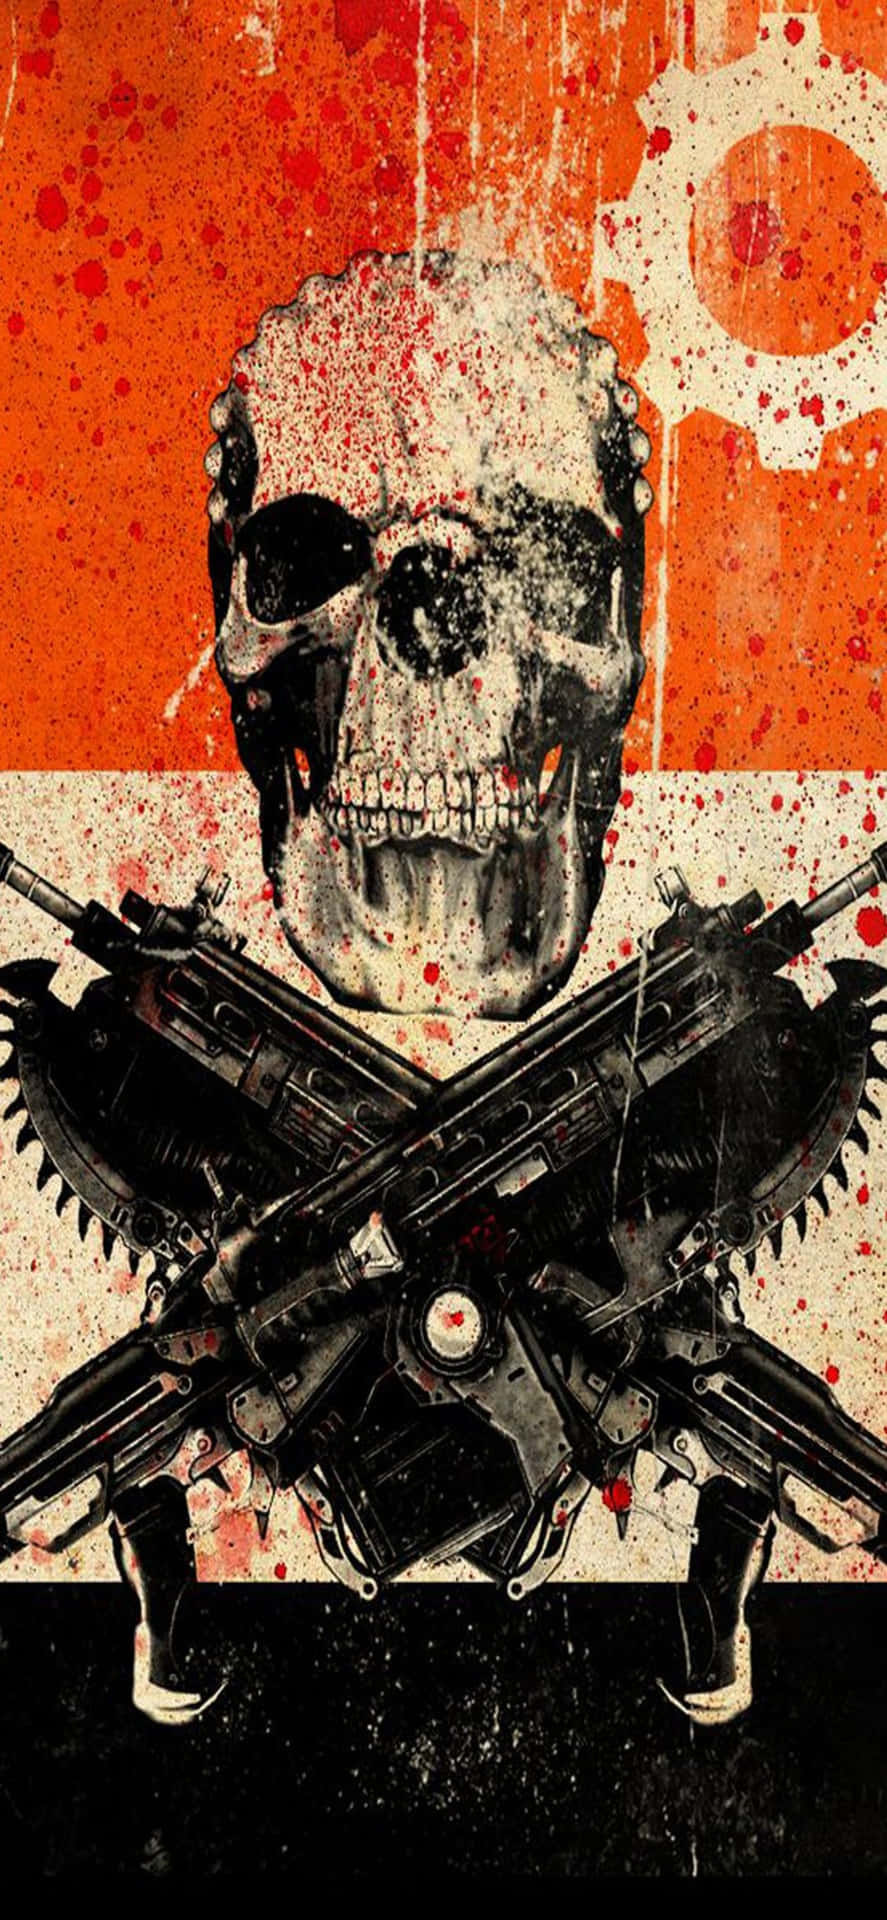 A Skull With Guns On It And Blood On It